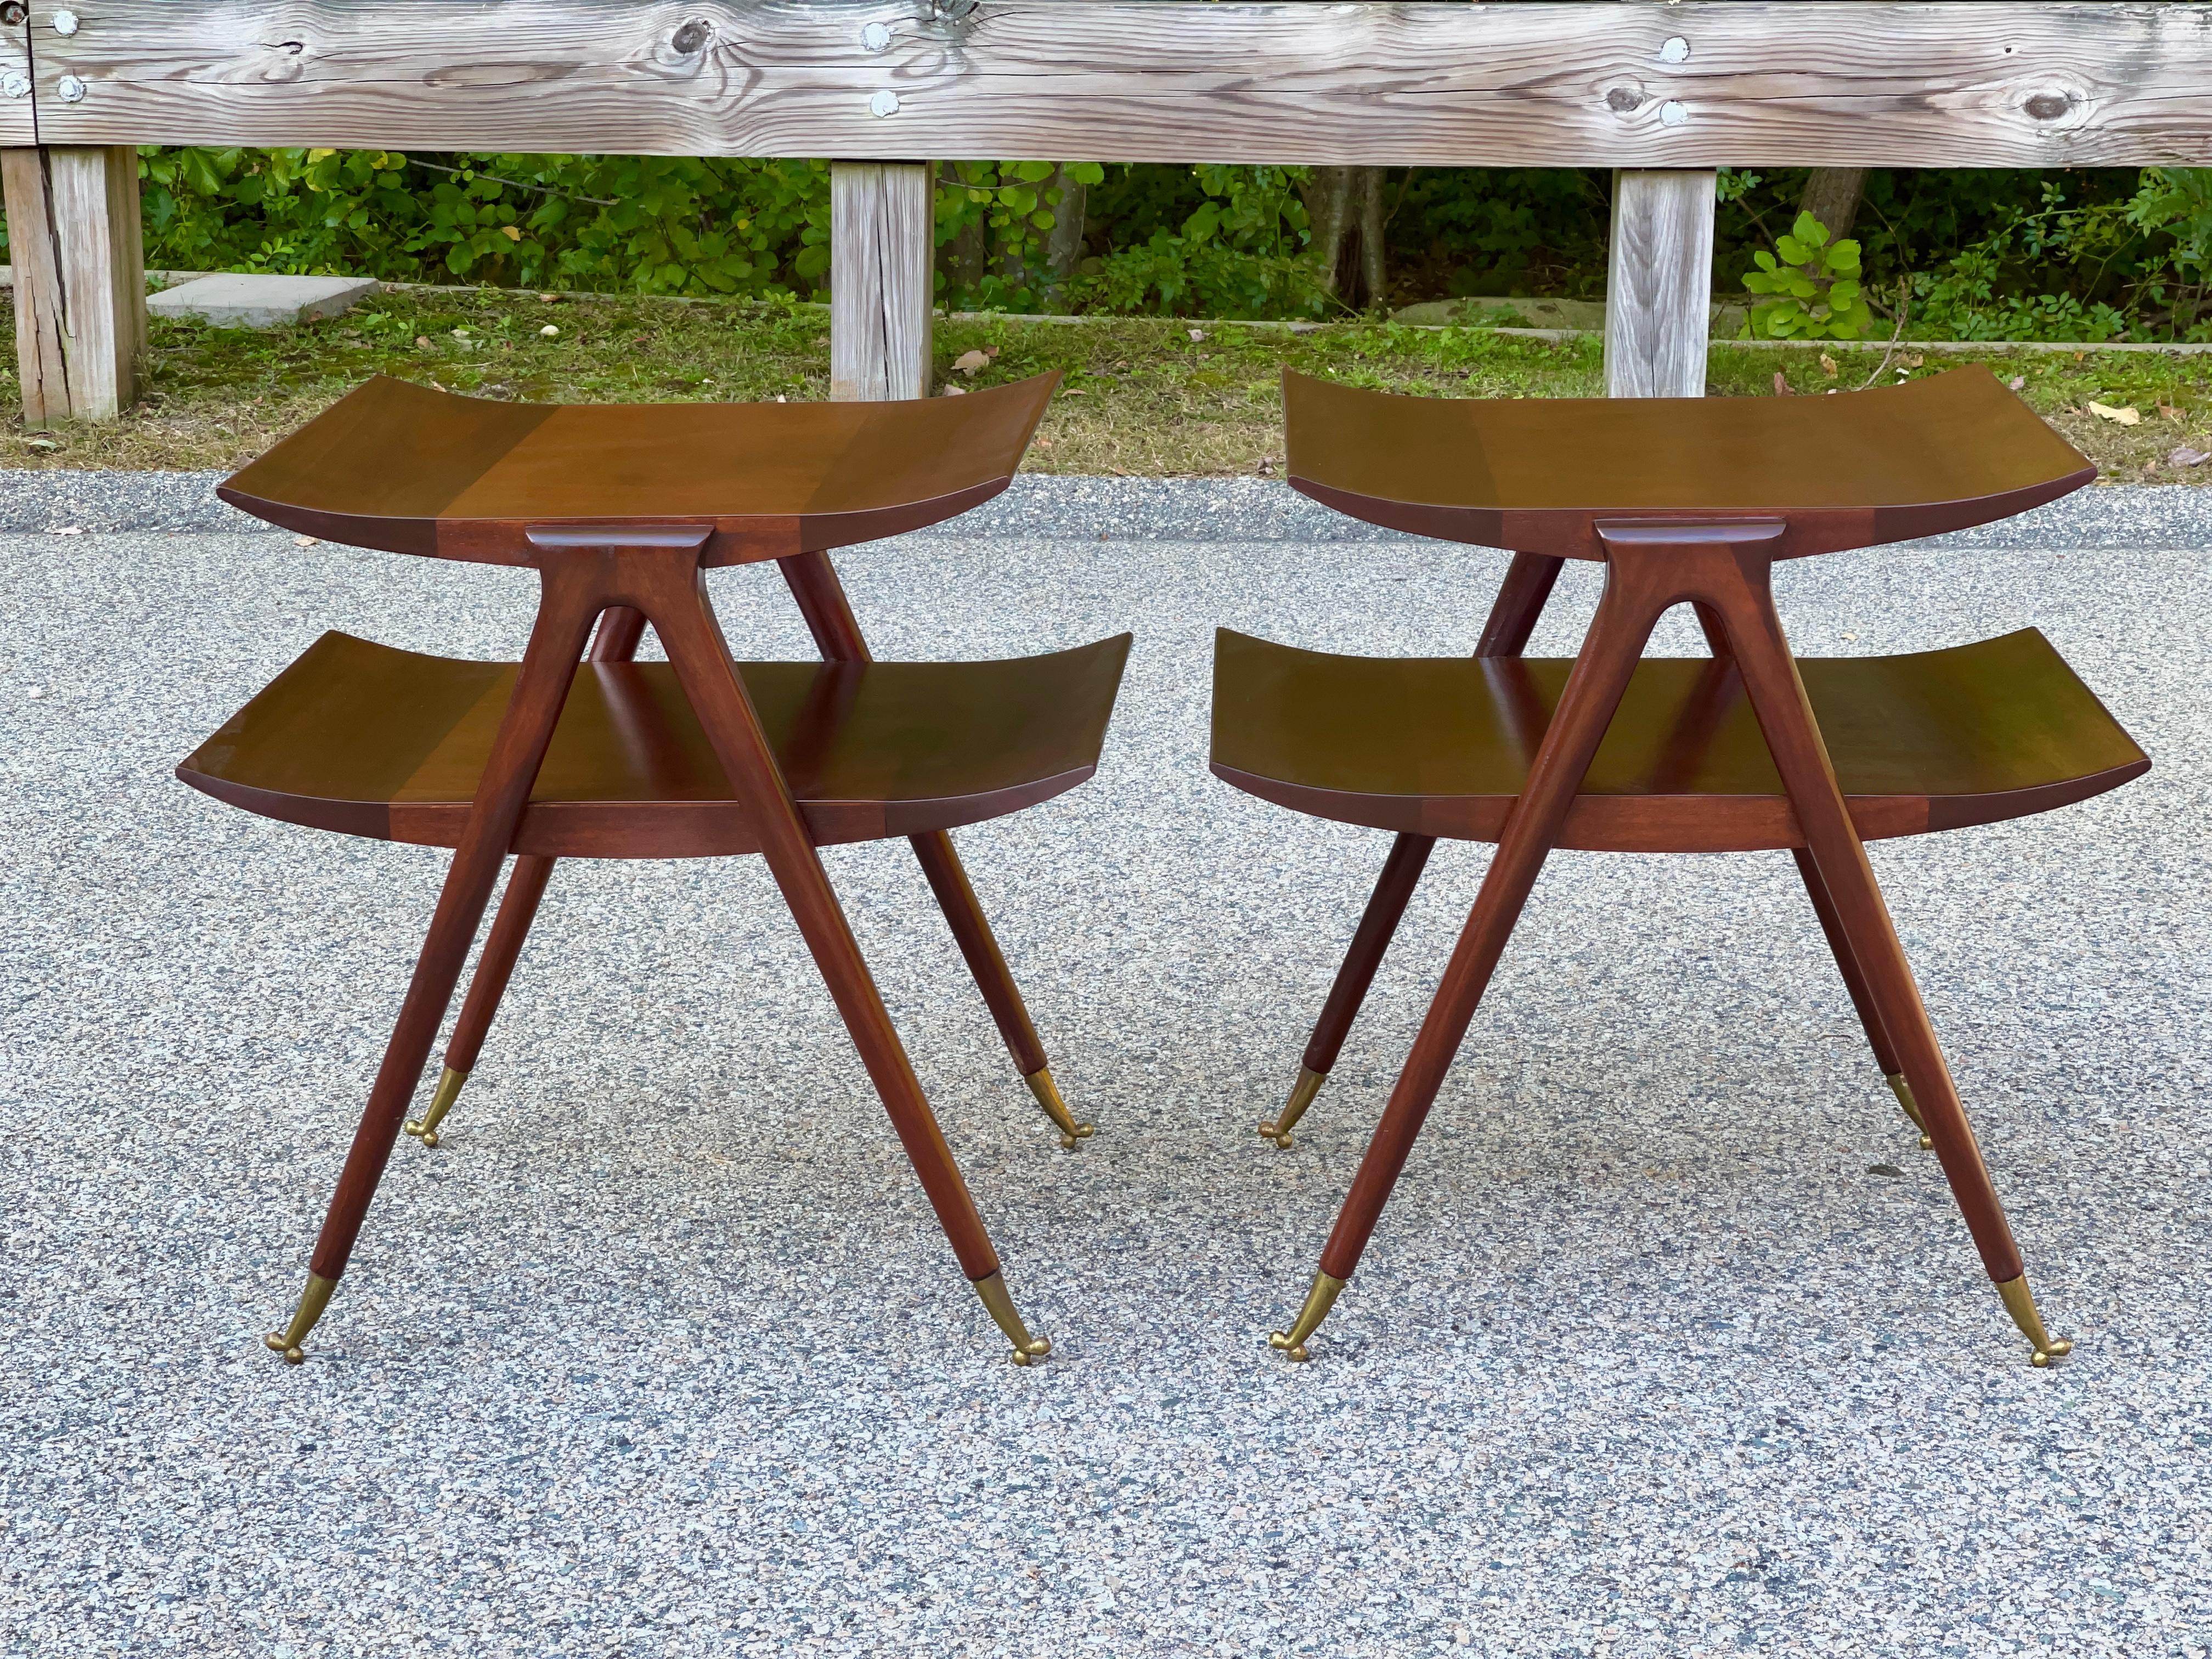 Dramatic vintage pair of bi-level tables in the style of Ico and Luisa Parisi. 
Finely constructed of mahogany hardwood and veneer, both tiers feature upswept ends and are supported by strikingly elegant tapered legs which stand on dainty solid